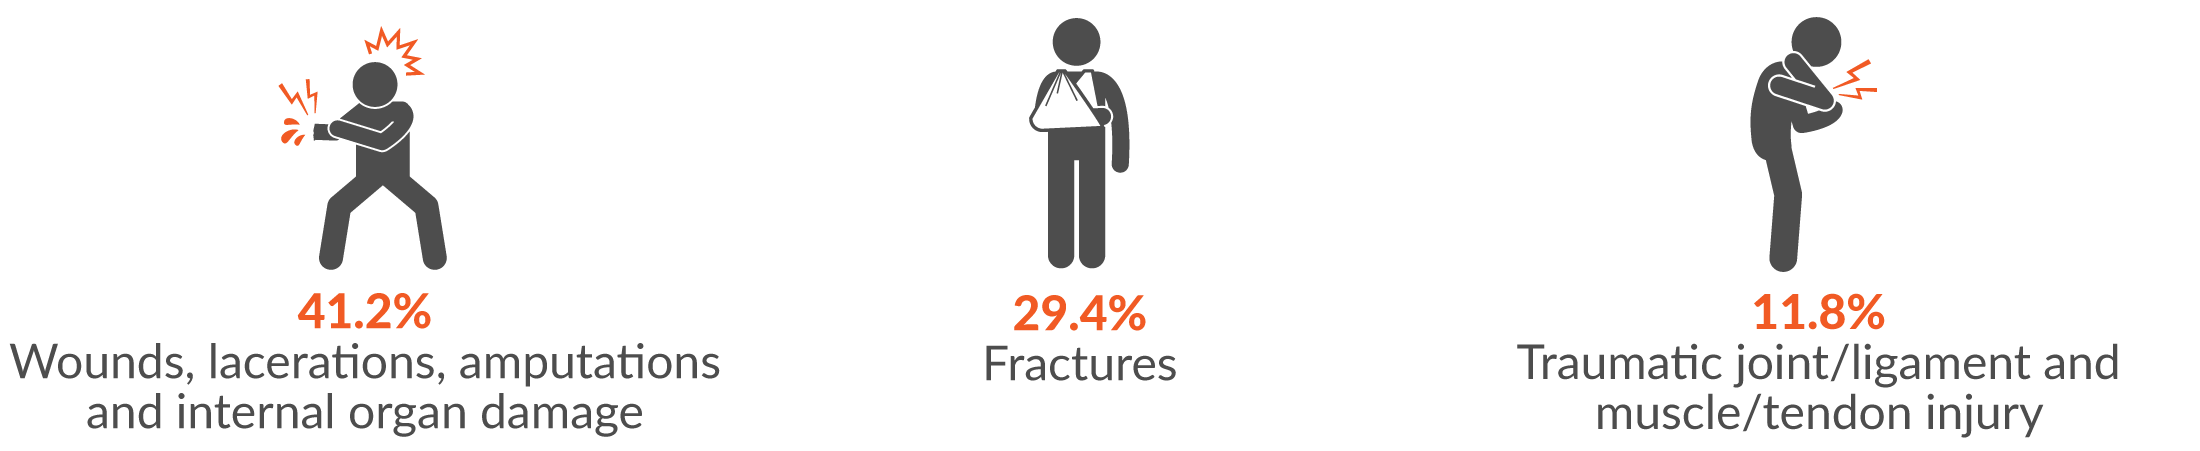 This infographic shows the main three injury groups resulting from being hit by moving objects were 41.2% wounds, lacerations, amputations and internal organ damage; 29.4% fractures; and 11.8% traumatic joint/ligament and muscle/tendon injury.